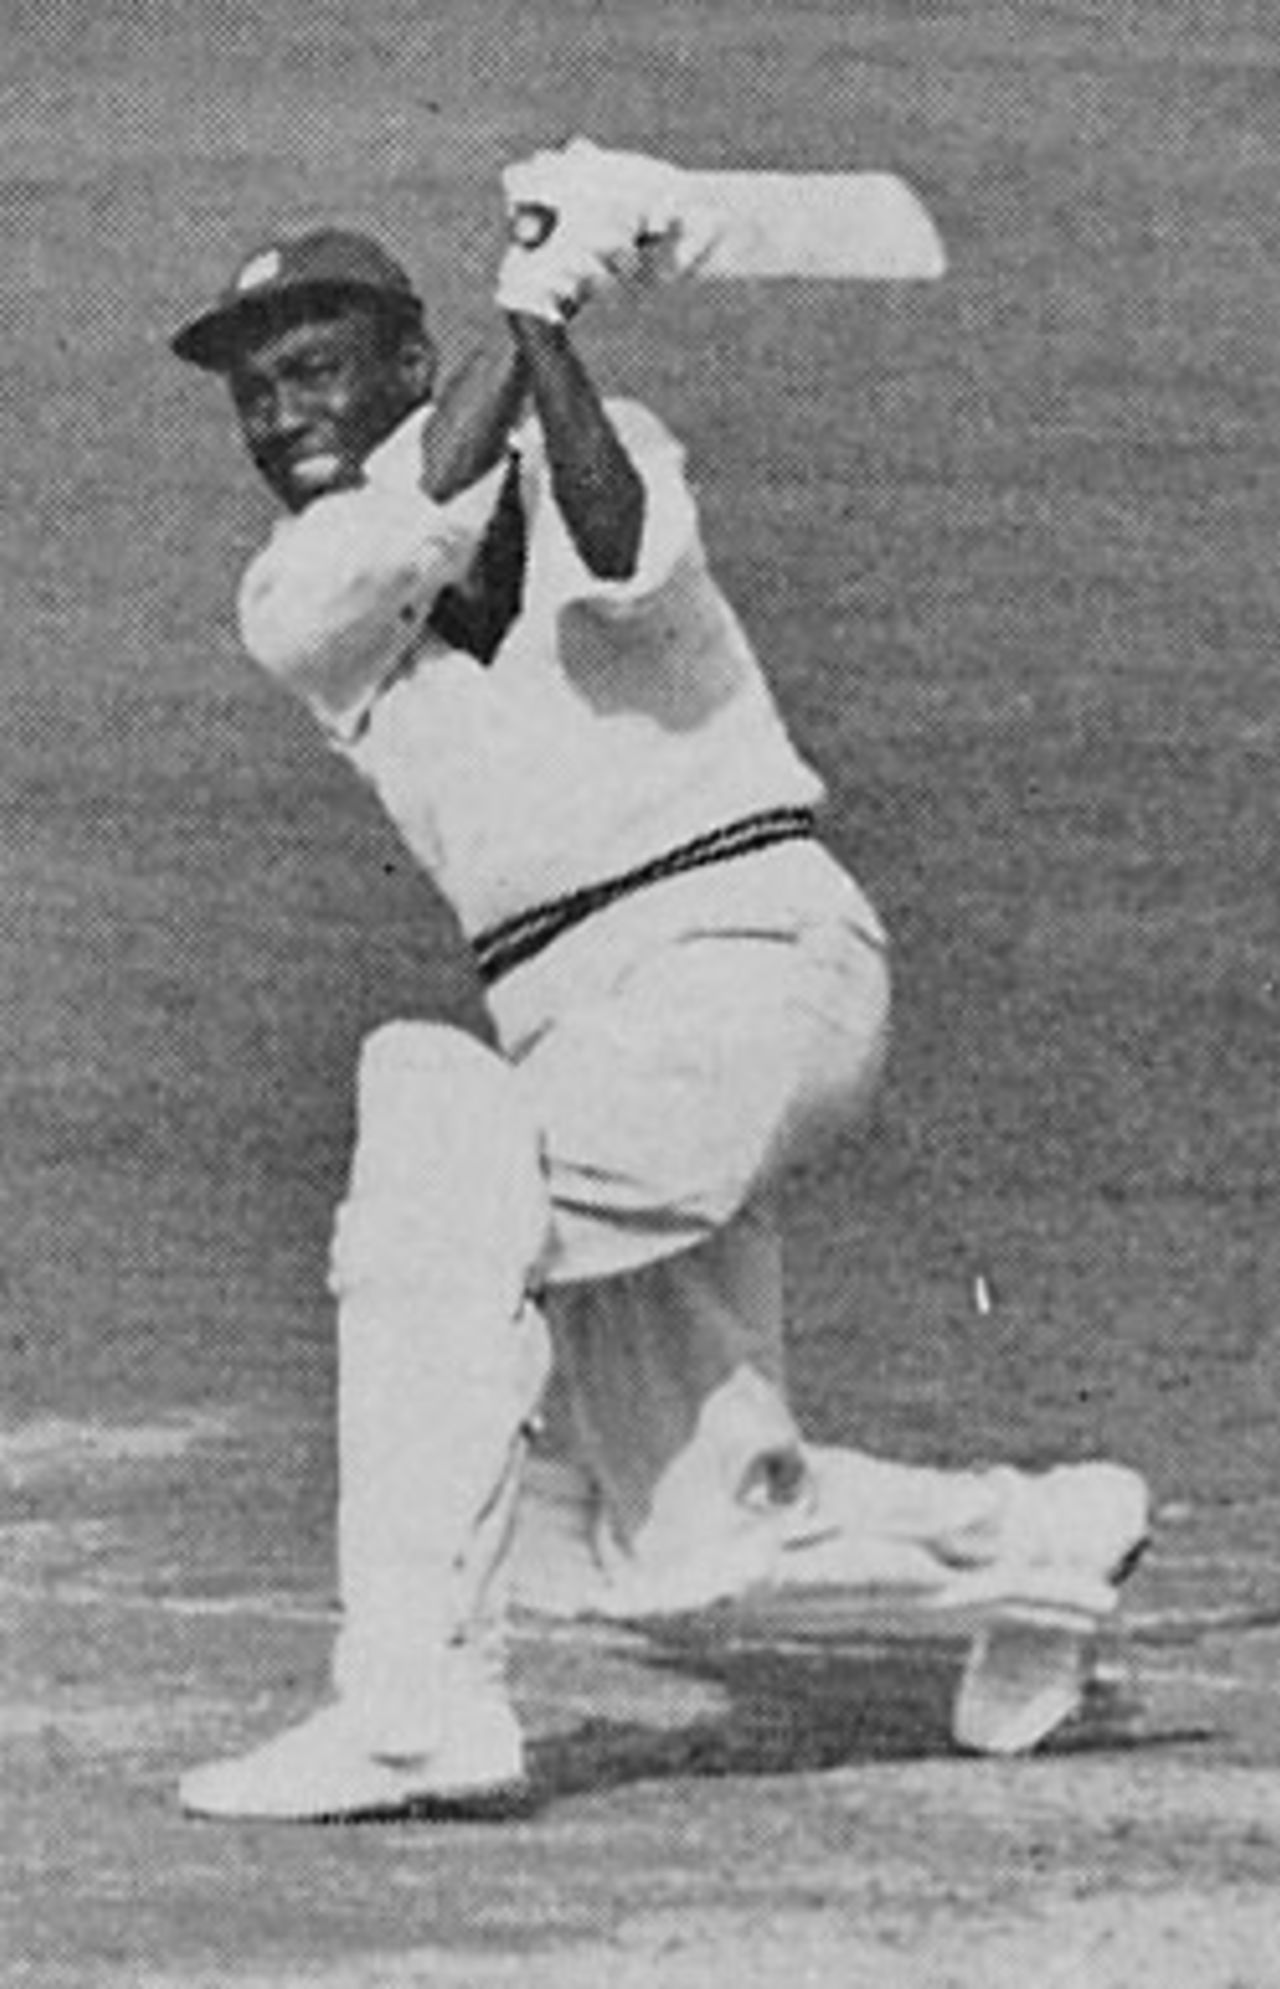 Conrad Hunte on his way to 88 at Lord's, England v West Indies, 1963